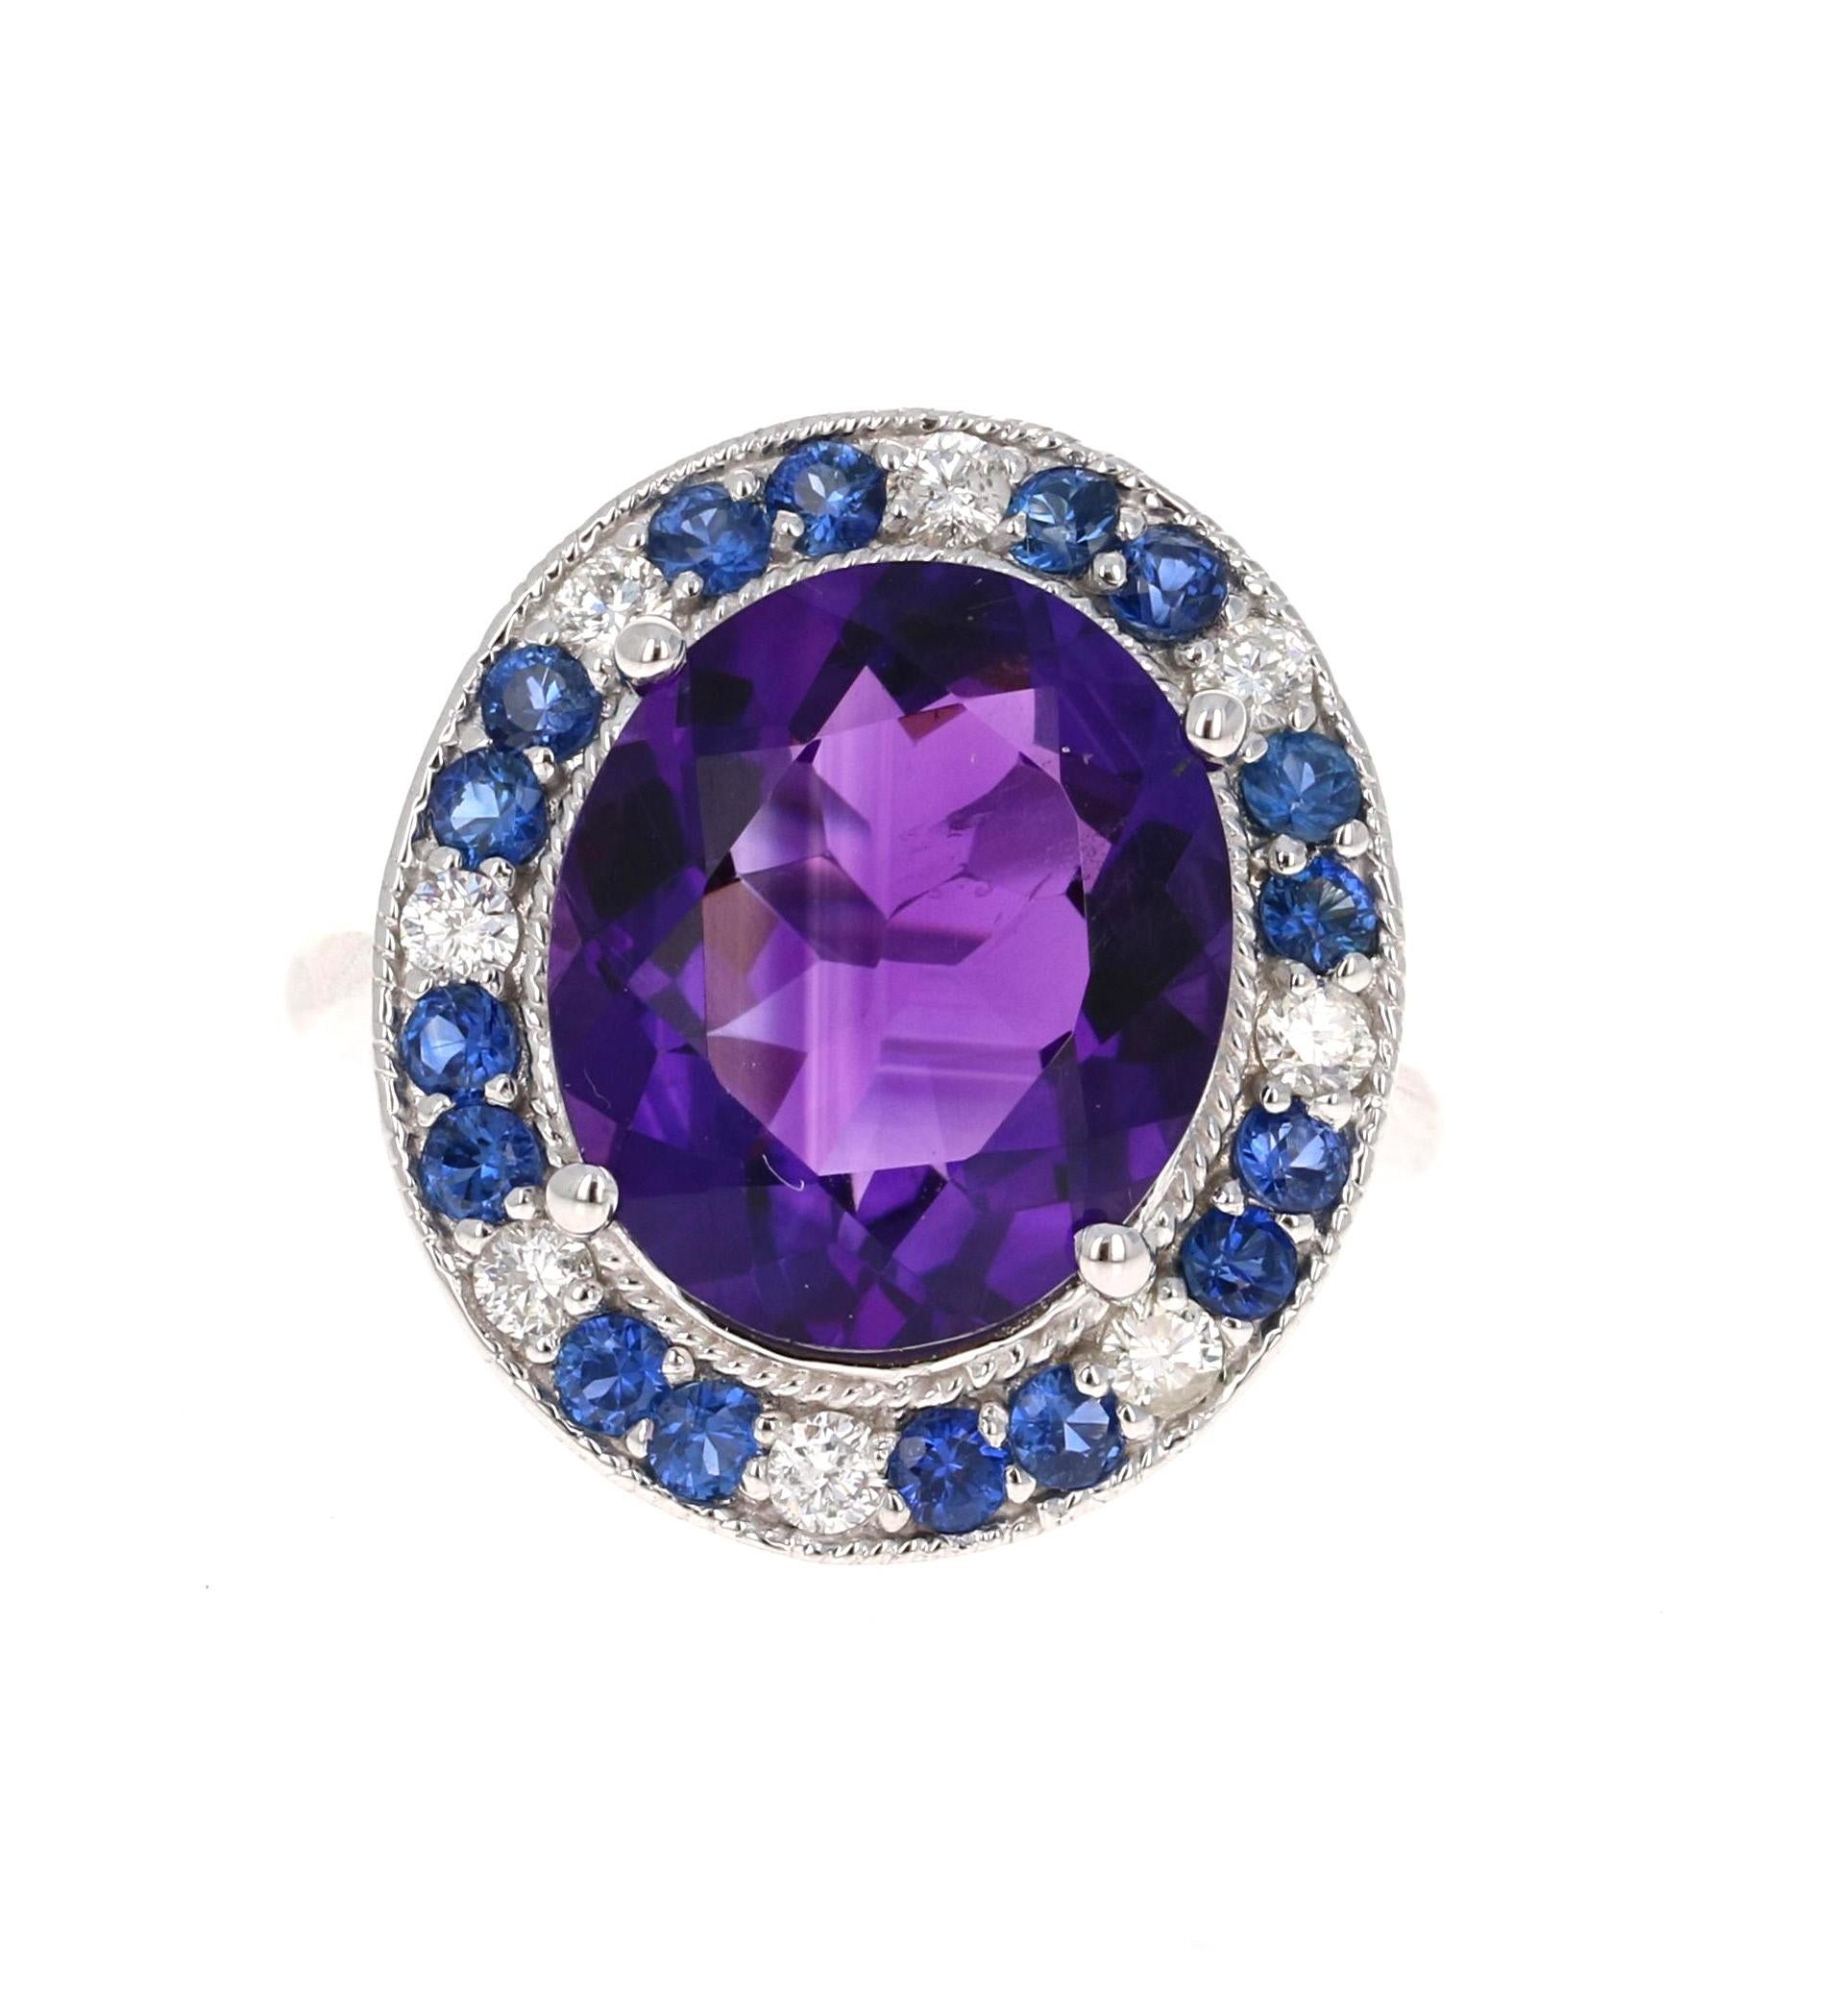 This beautiful and unique ring has a 6.10 Carat Oval Cut Deep Purple Amethyst and is surrounded by alternating Round Cut Diamonds that weigh 0.32 carats  (Clarity: SI, Color: F) and Blue Sapphires that weigh 0.81 carats. The total weight of the ring